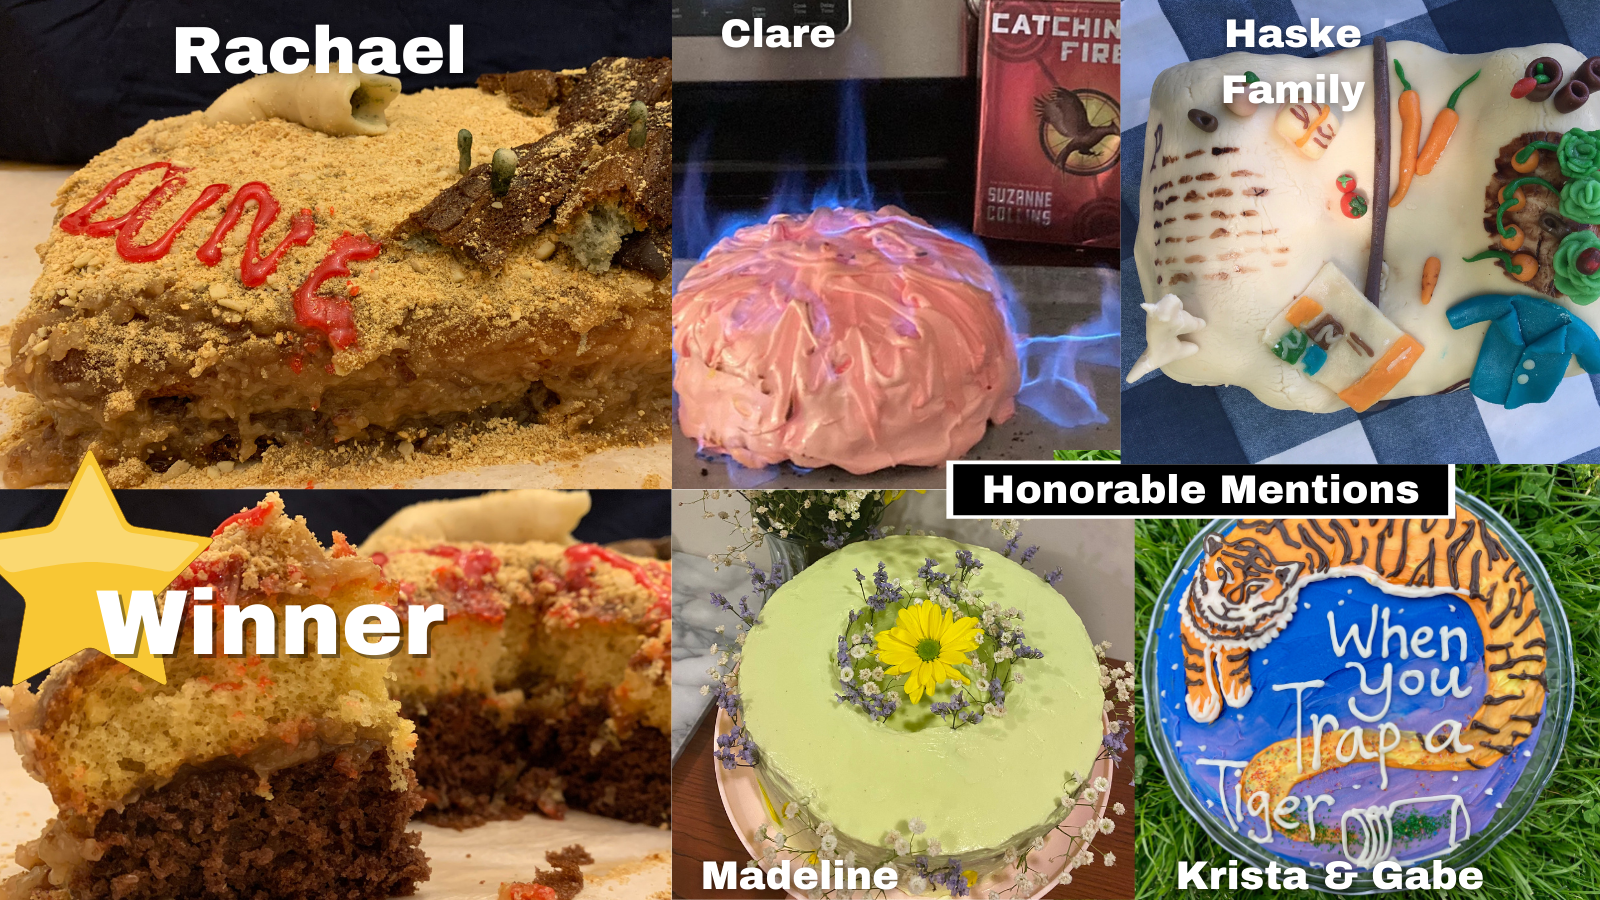 Public Library Spotlight: The Great Library Bake Off